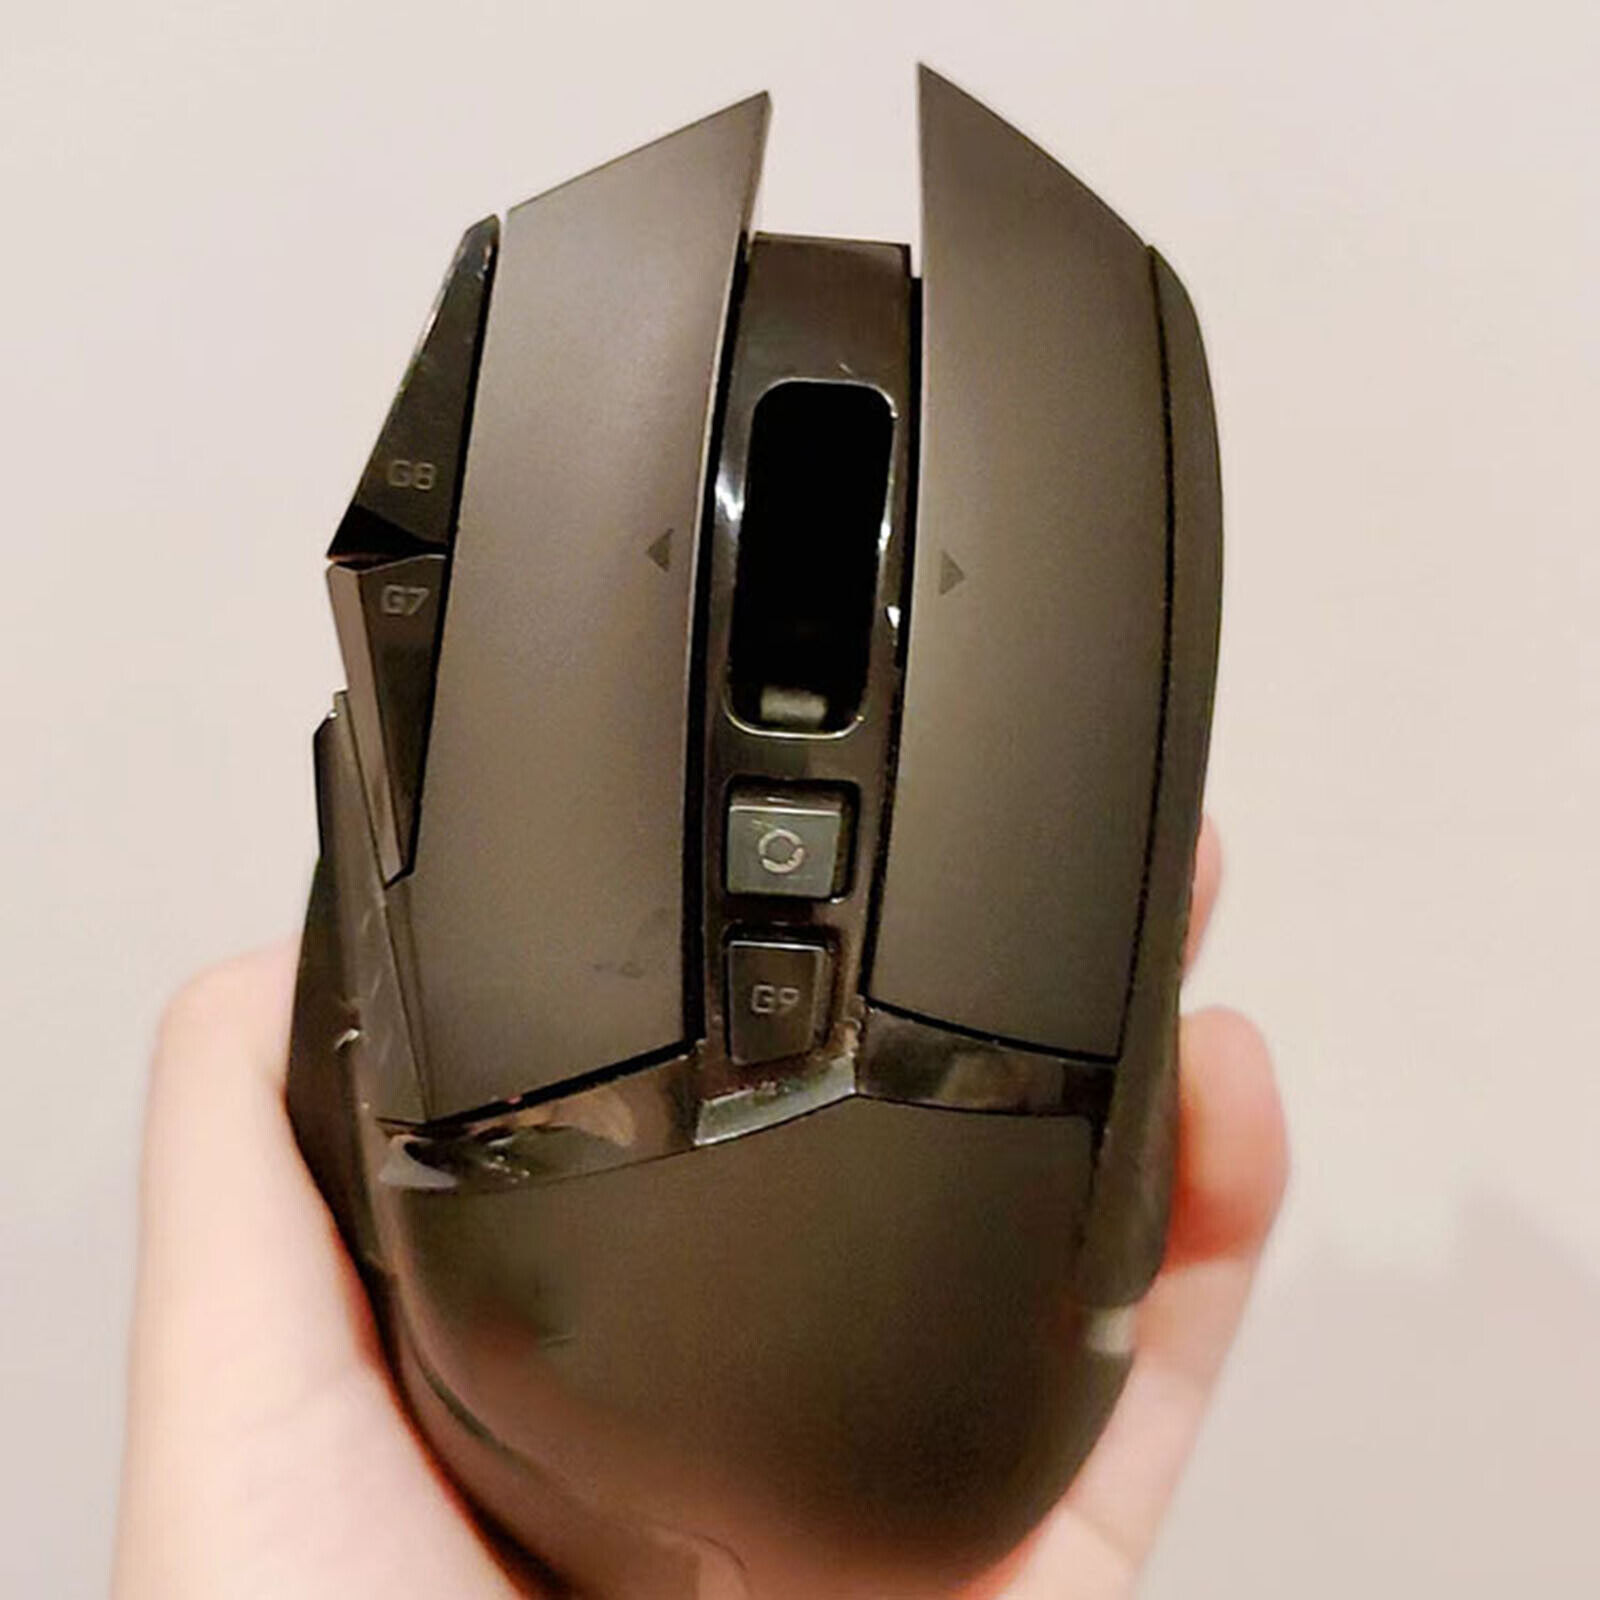 Replacement Mouse Shell Mouse for Logitech Wireless G502 Lightspeed Mouse